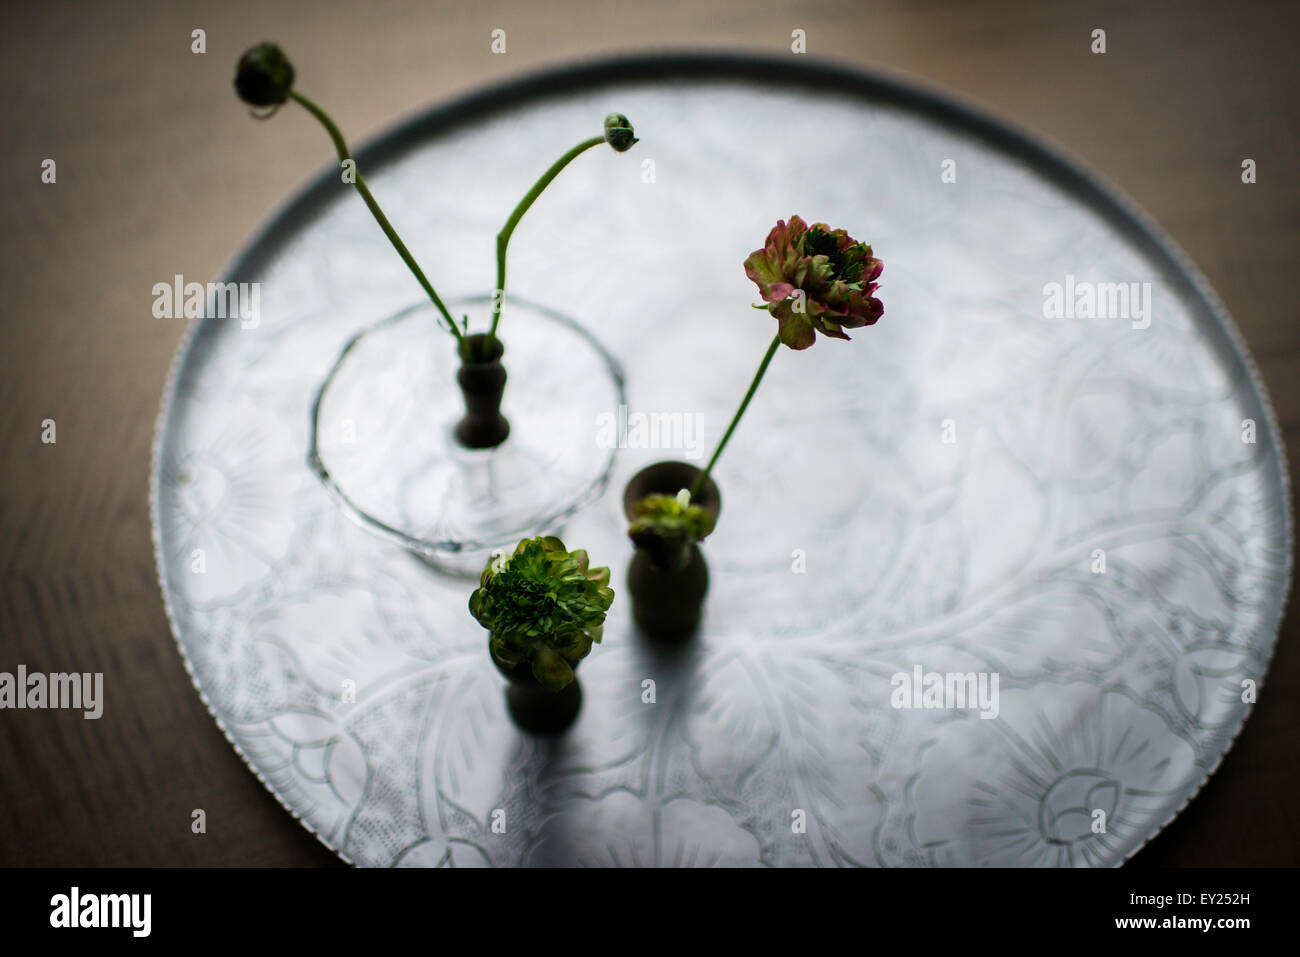 Still life of small vases of cut flowers on silver tray Stock Photo